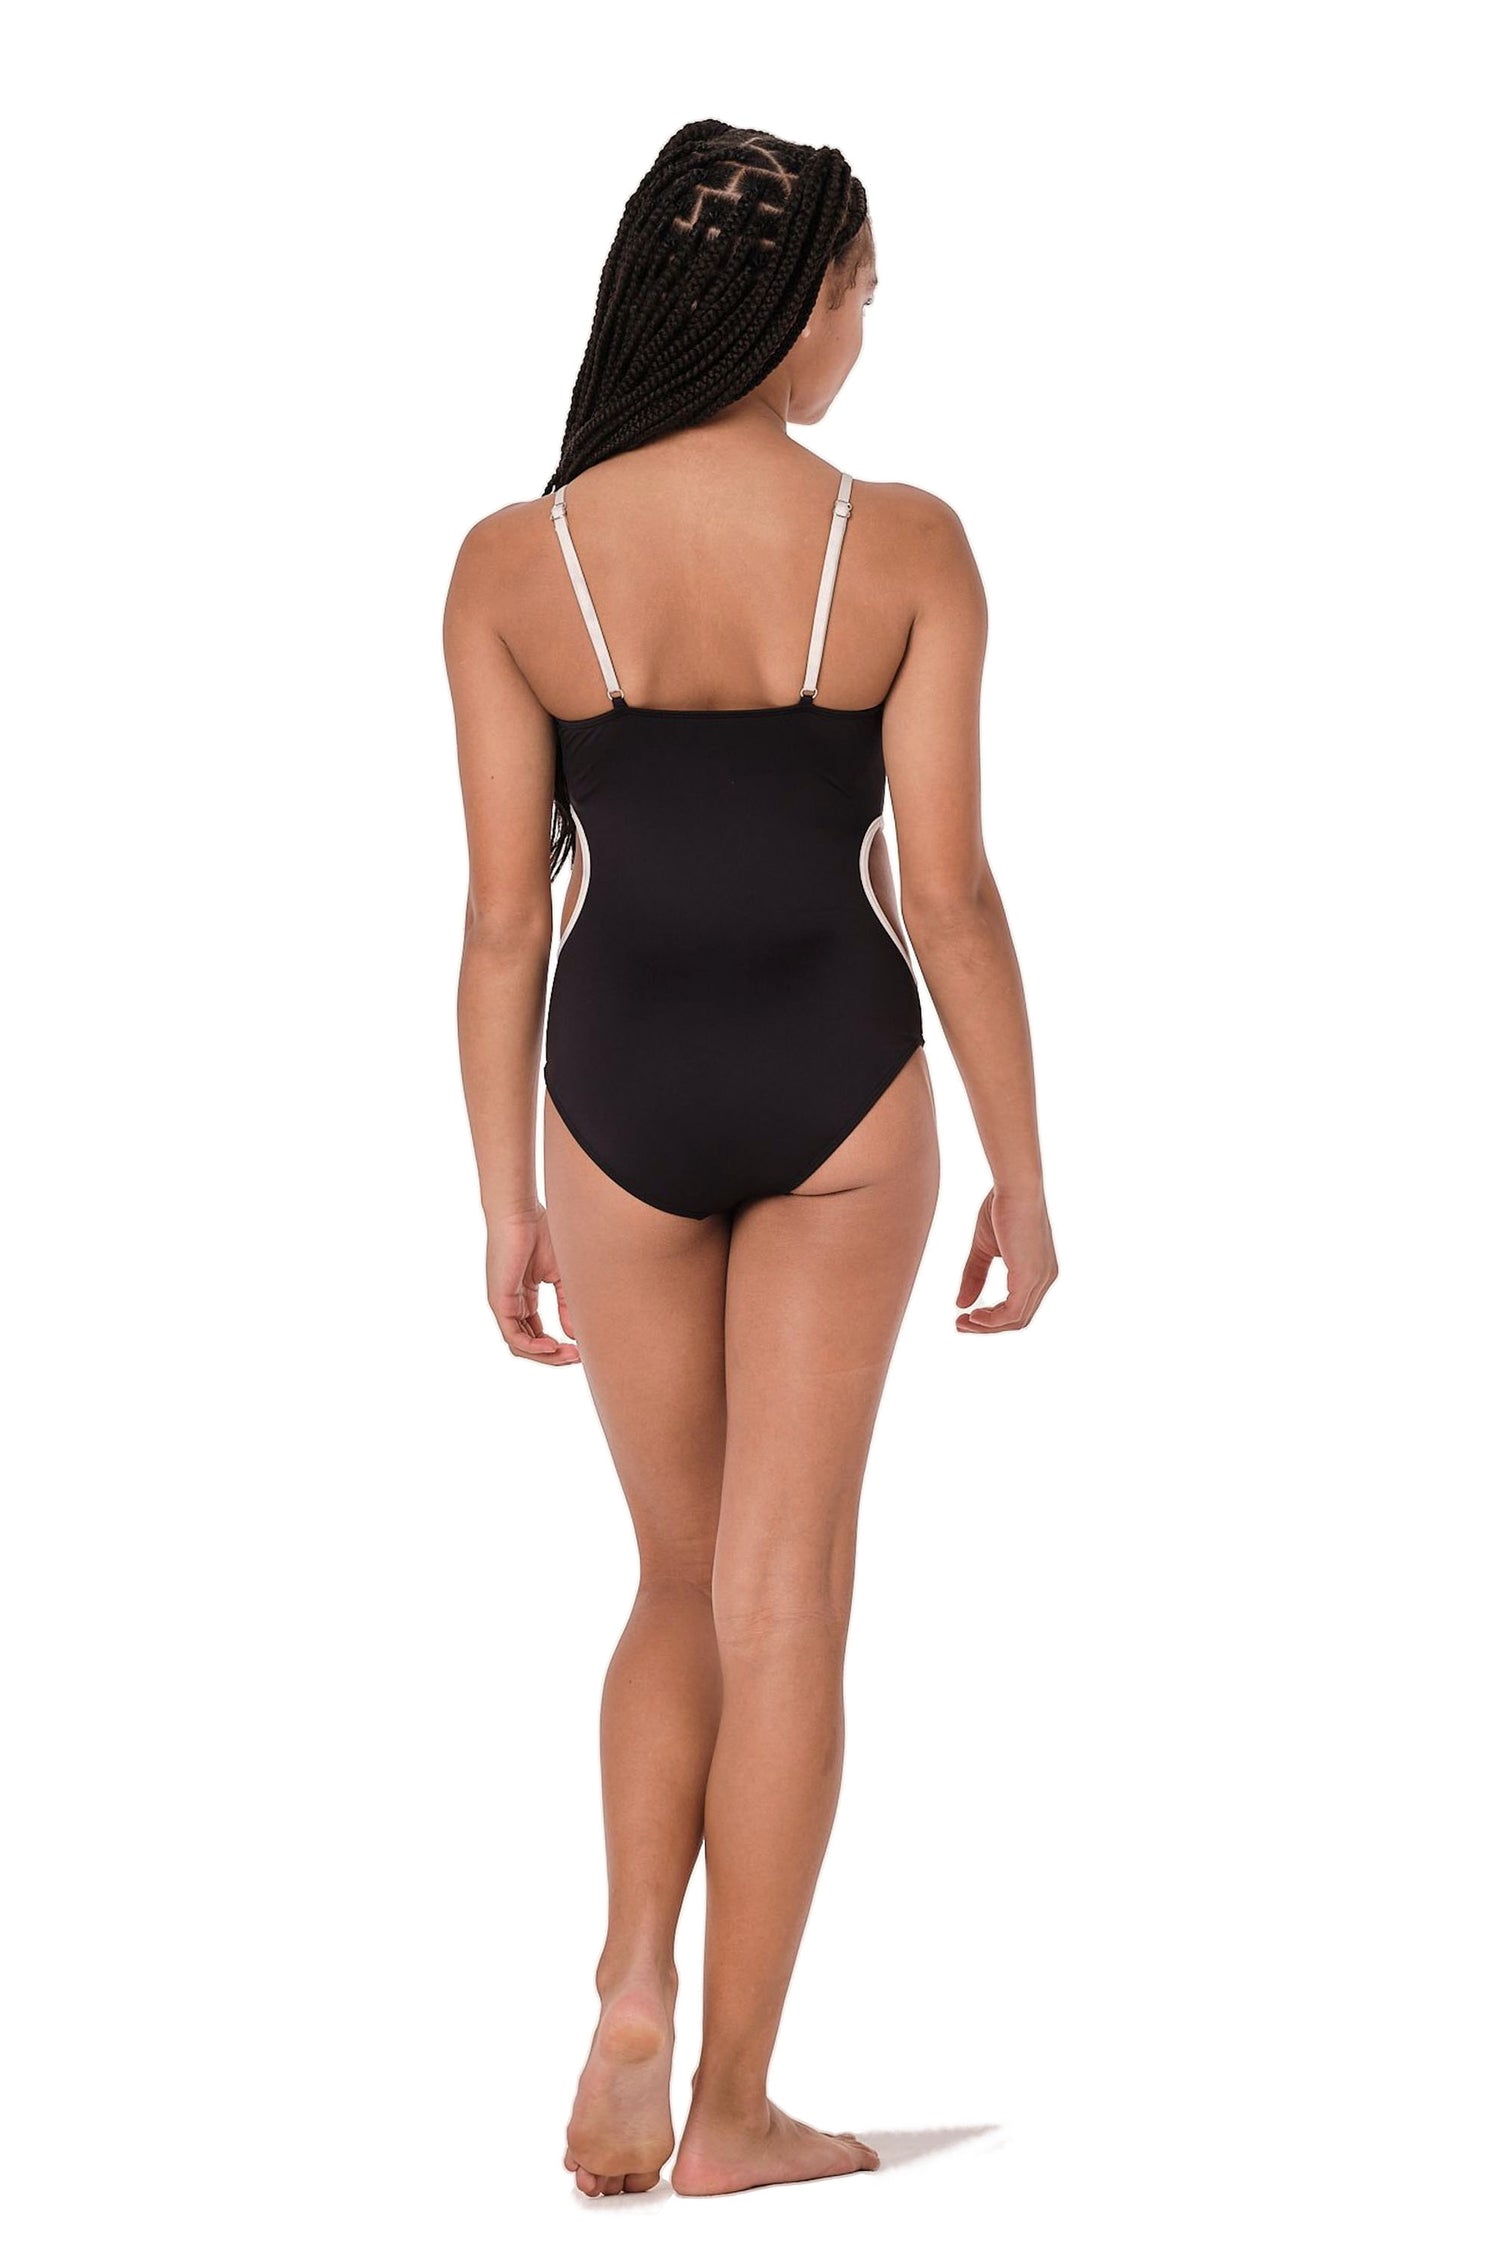 Model image of black one piece swimsuit with side cut outs